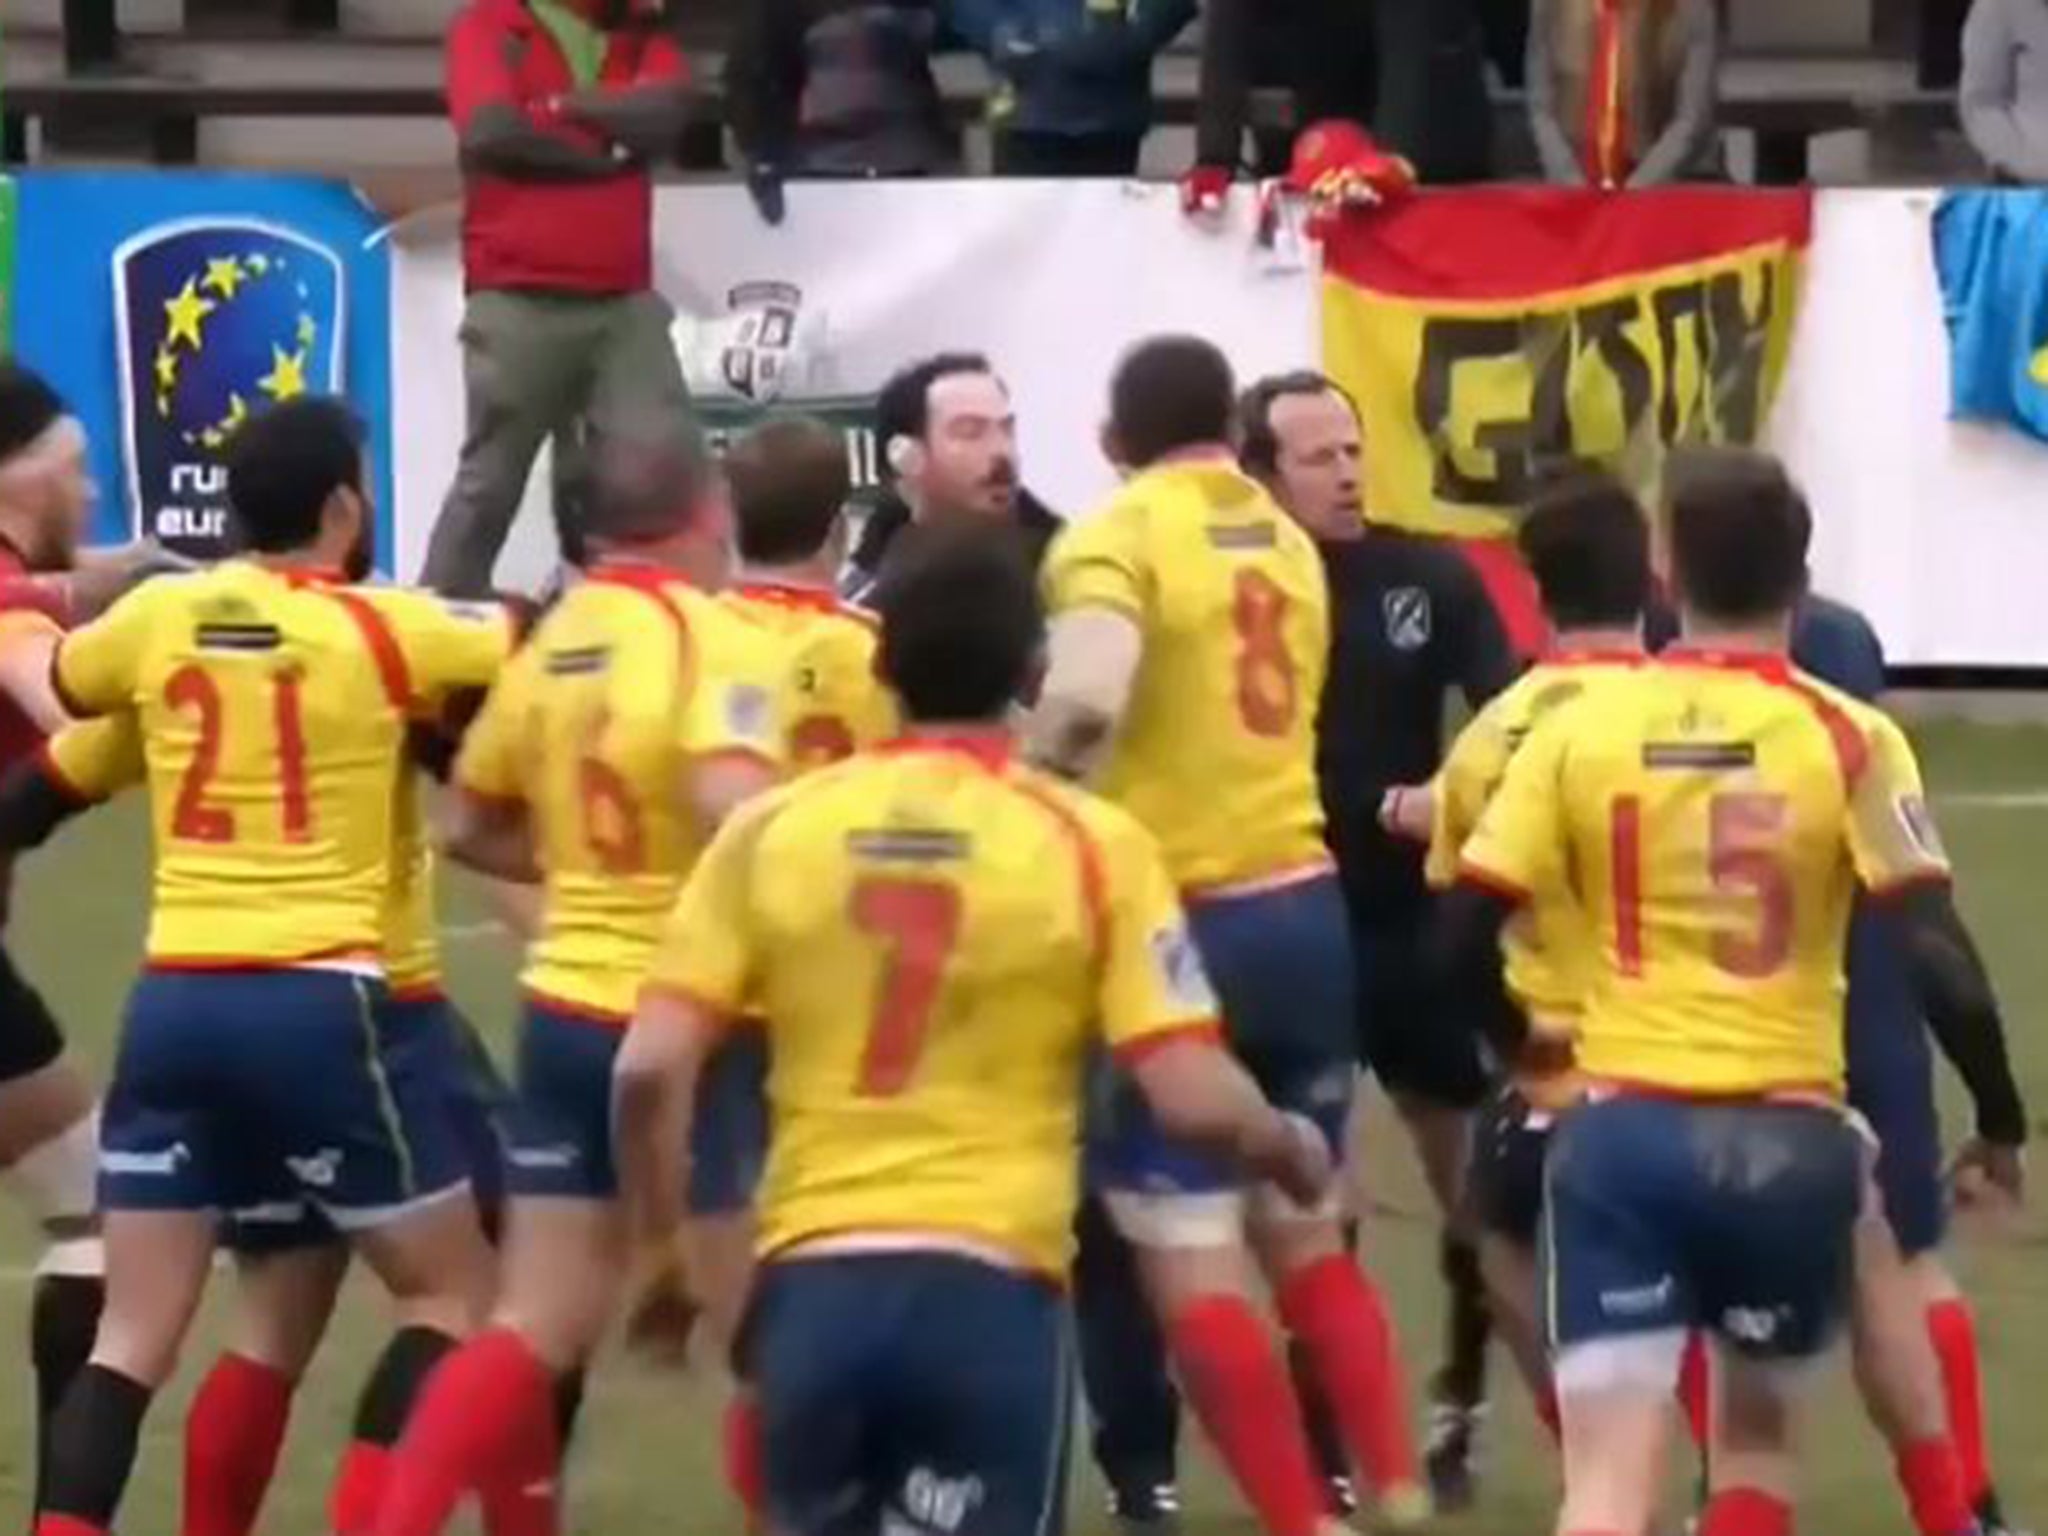 Vlad Iordachescu was confronted and chased after Spain's 18-10 defeat by Belgium on Sunday